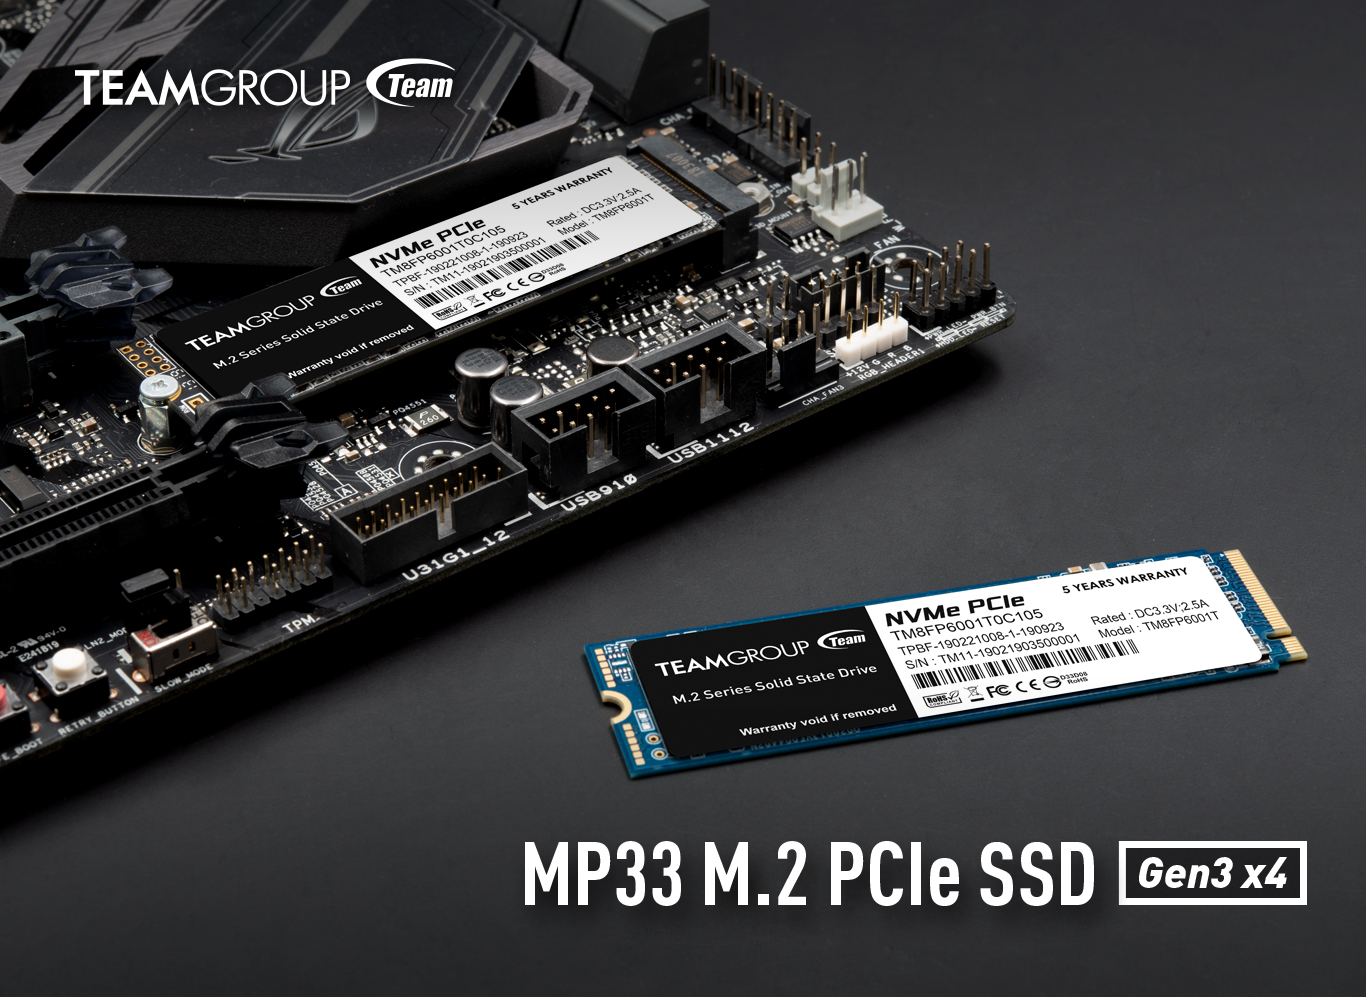 Teamgroup MP33 M.2 PCle SSD is installed in the motherboard